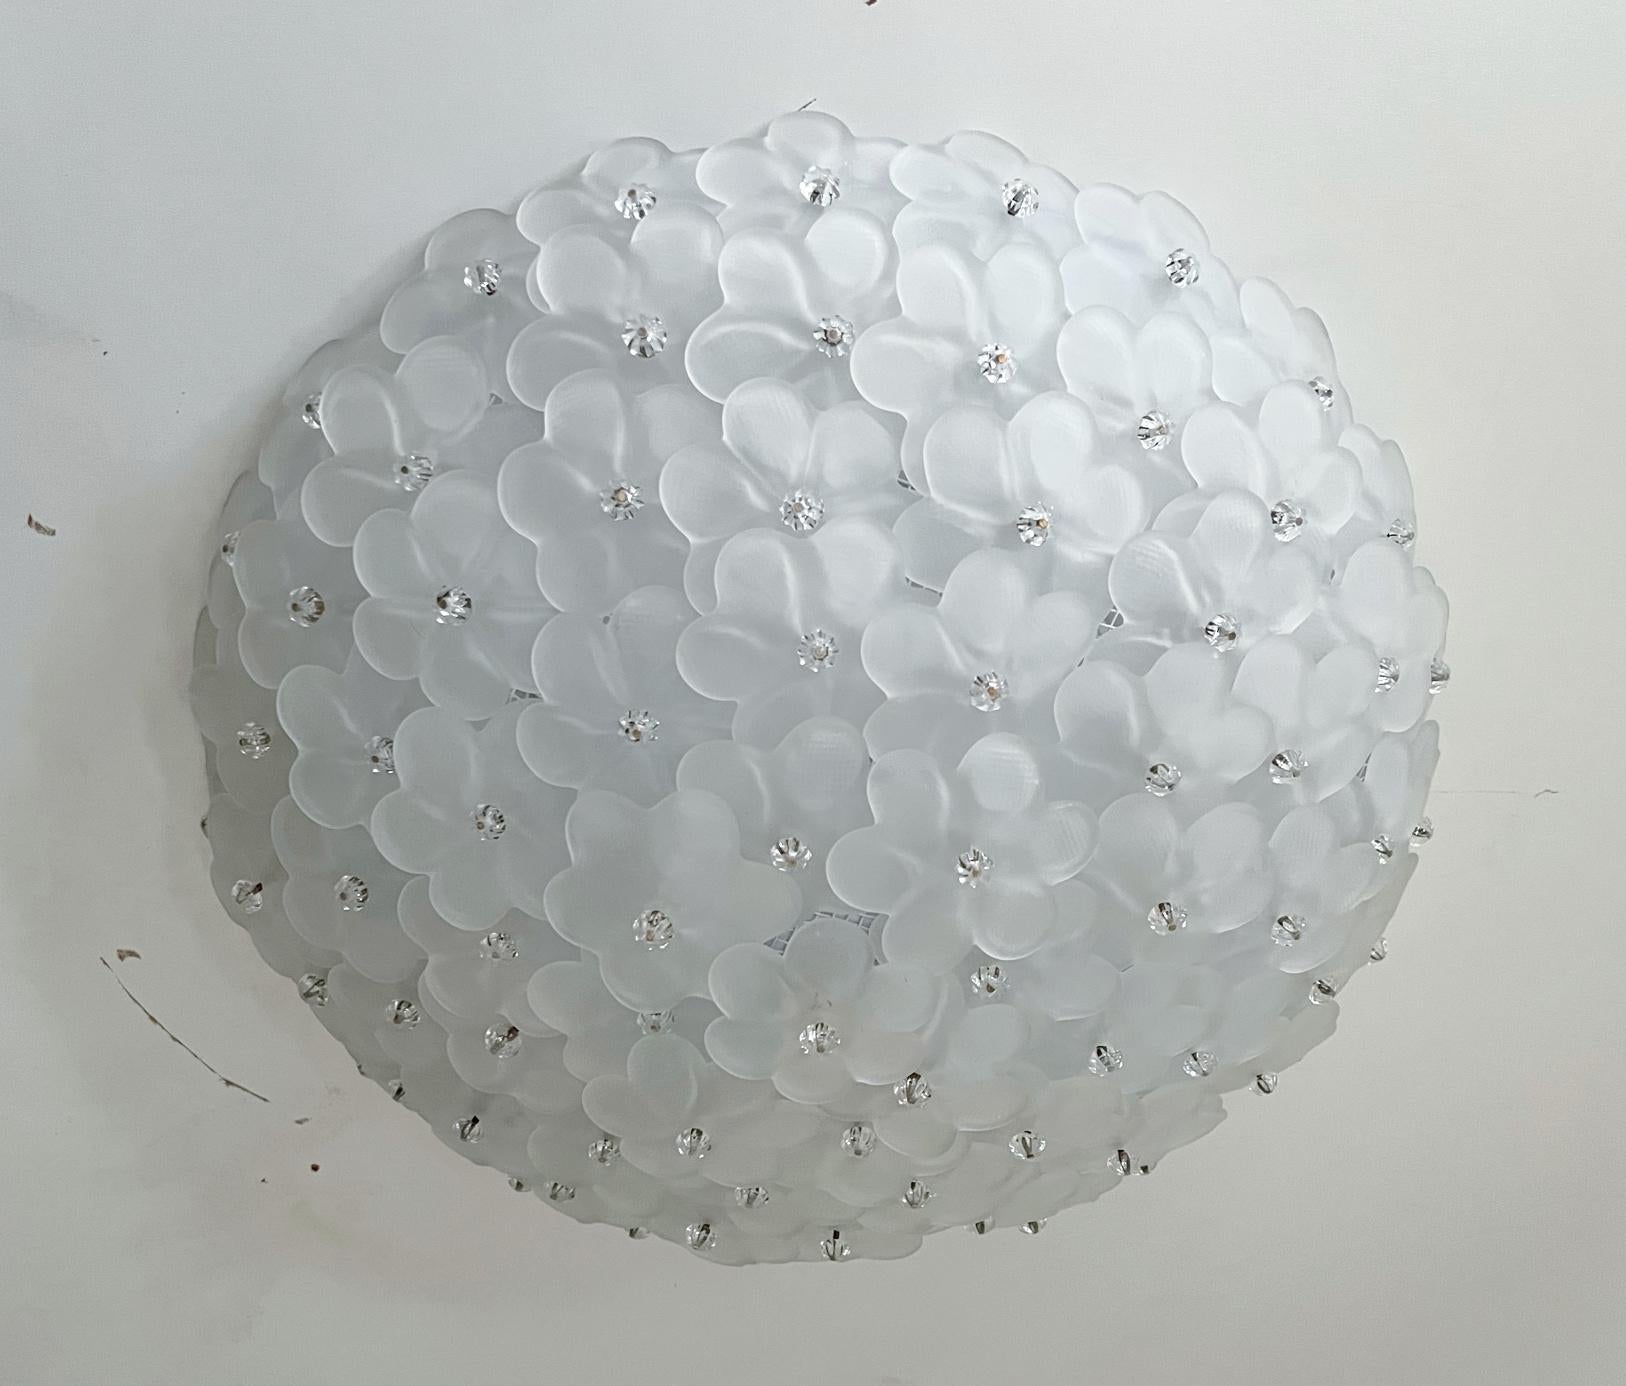 Italian flush mount with frosted white Murano glass flowers intricately layered on white metal frame and secured with glass screws / Made in Italy
6 lights / E12 or E14 type / max 40W each
Measures: Diameter 20 inches, height 7 inches
Order only /